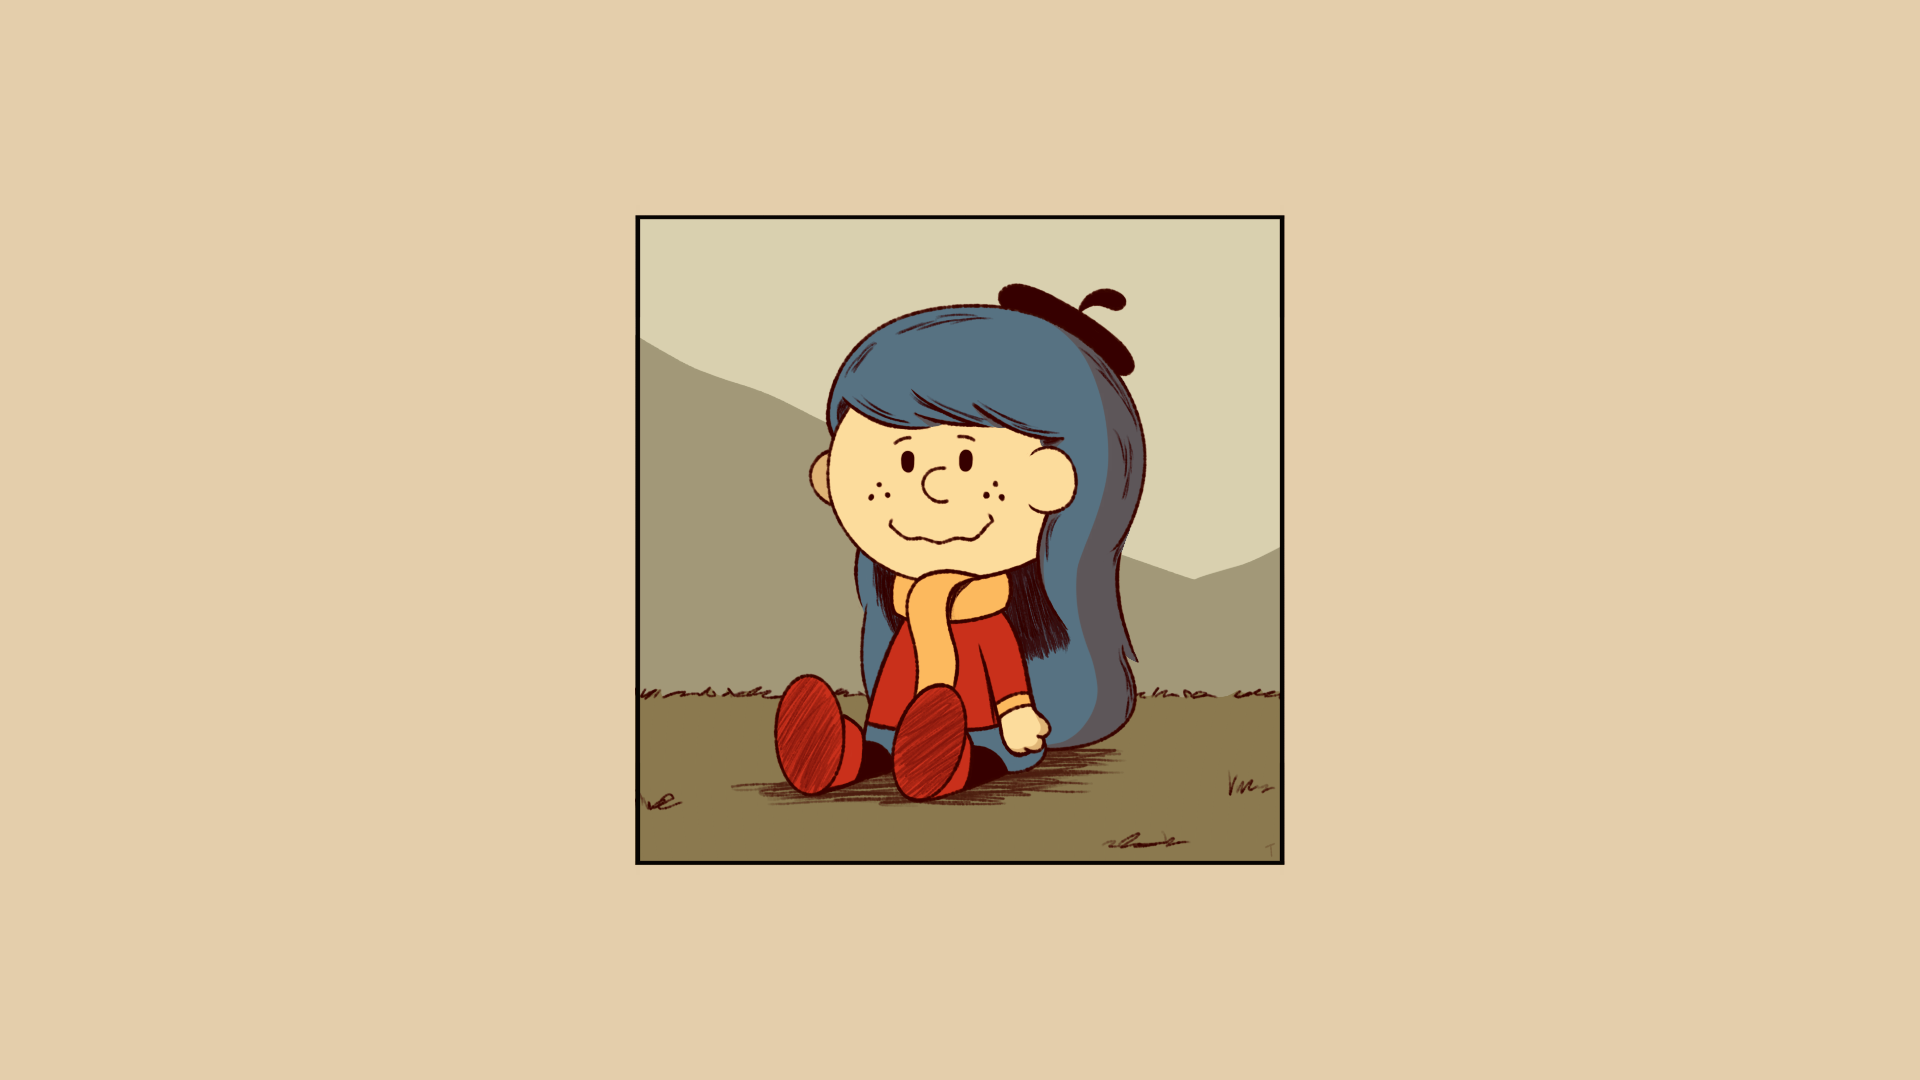 General 1920x1080 cartoon cartoon girls Hilda berets scarf shoes red shoes smiling sitting grass simple background comics doll Peanuts (comic) Charlie Brown crossover blue hair shoe sole